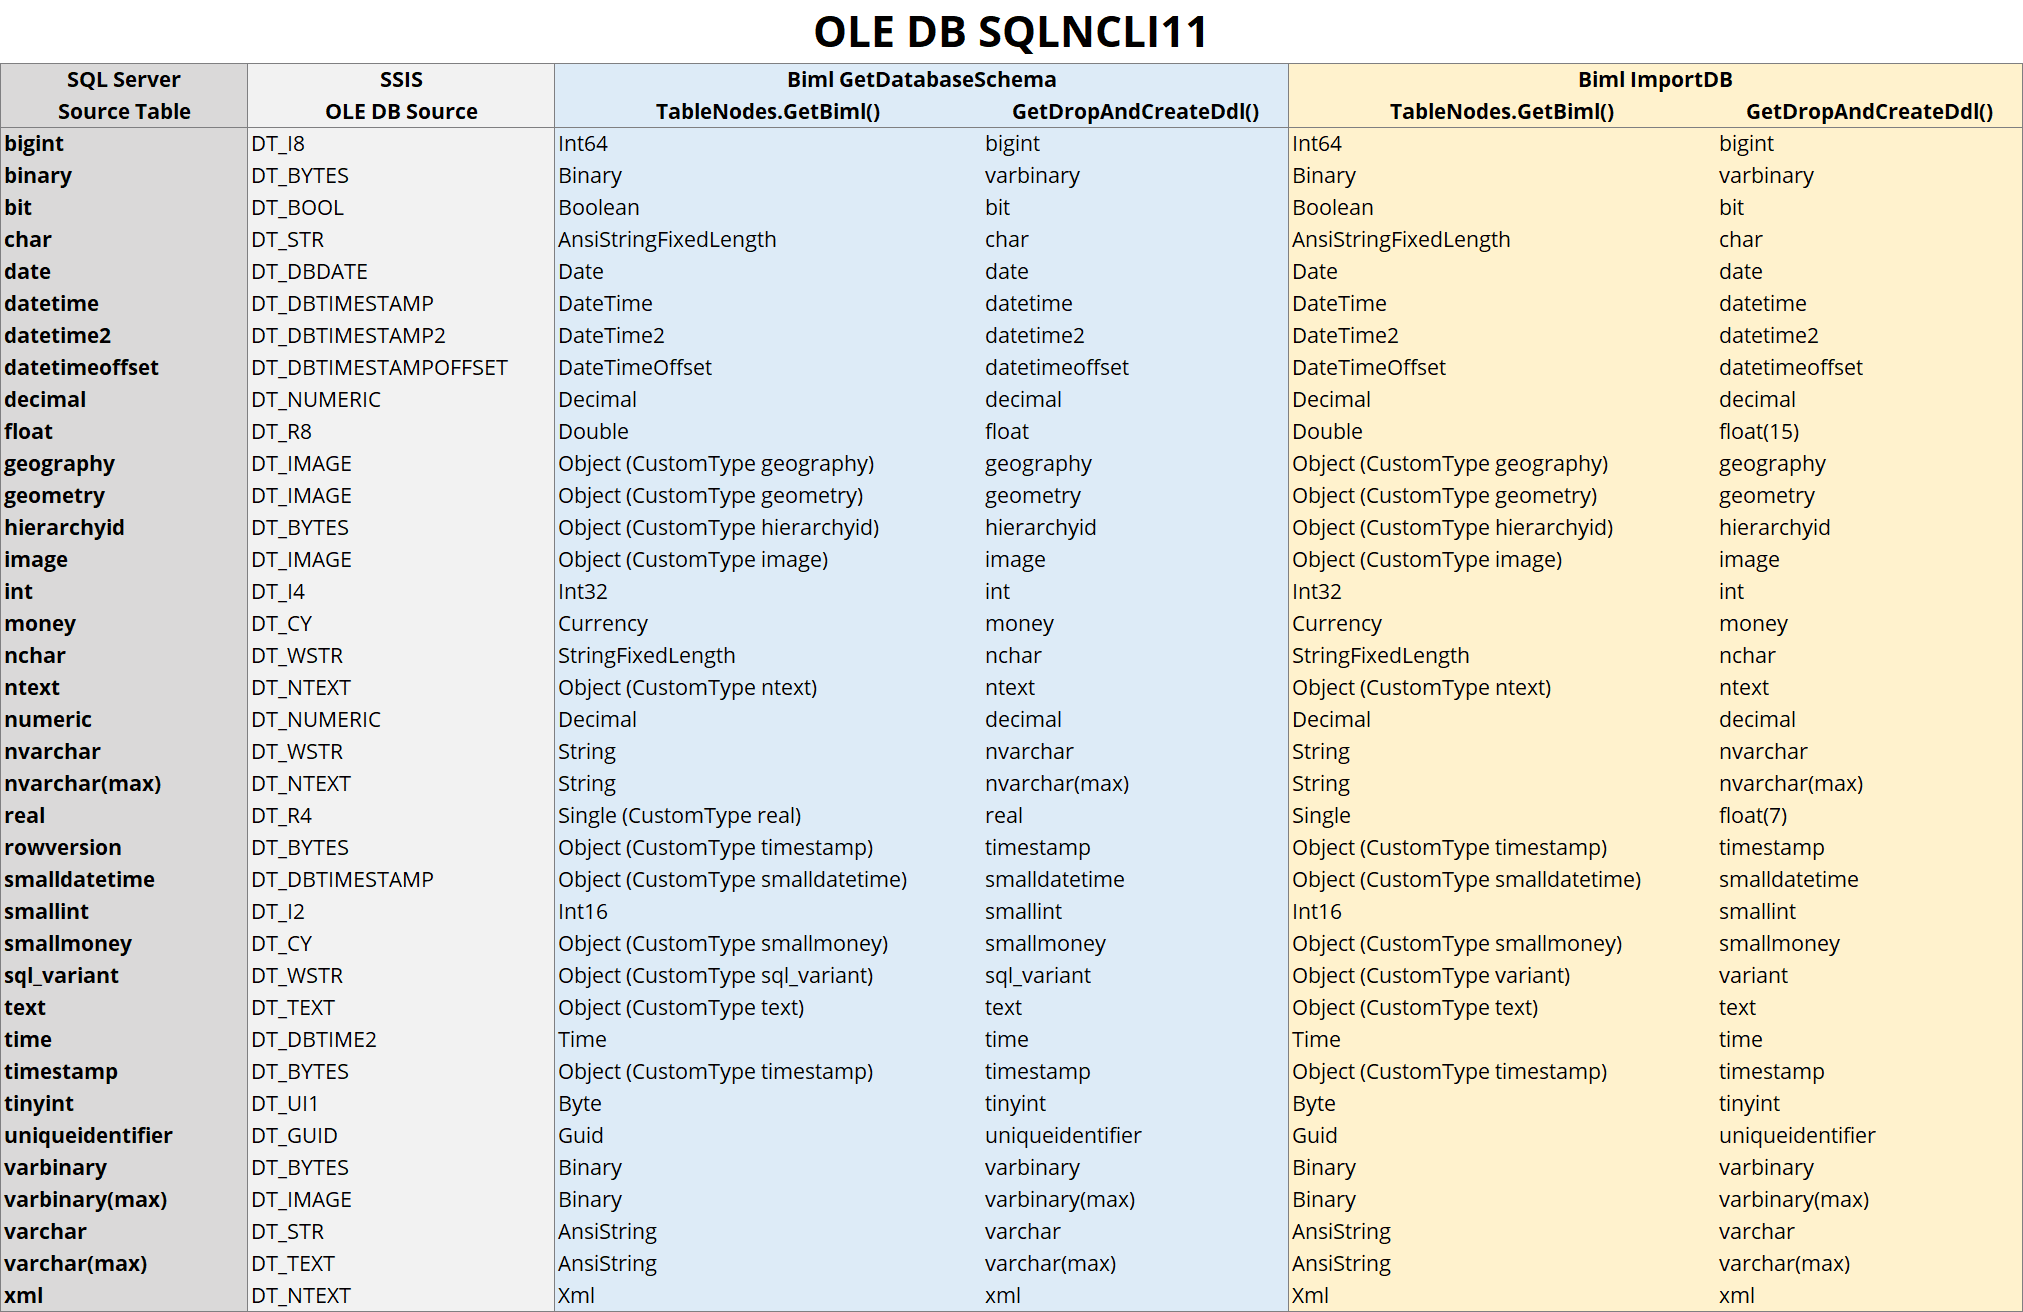 Comparison table showing SQL Server, SSIS and Biml Data Types using OLEDB (SQLNCLI11)